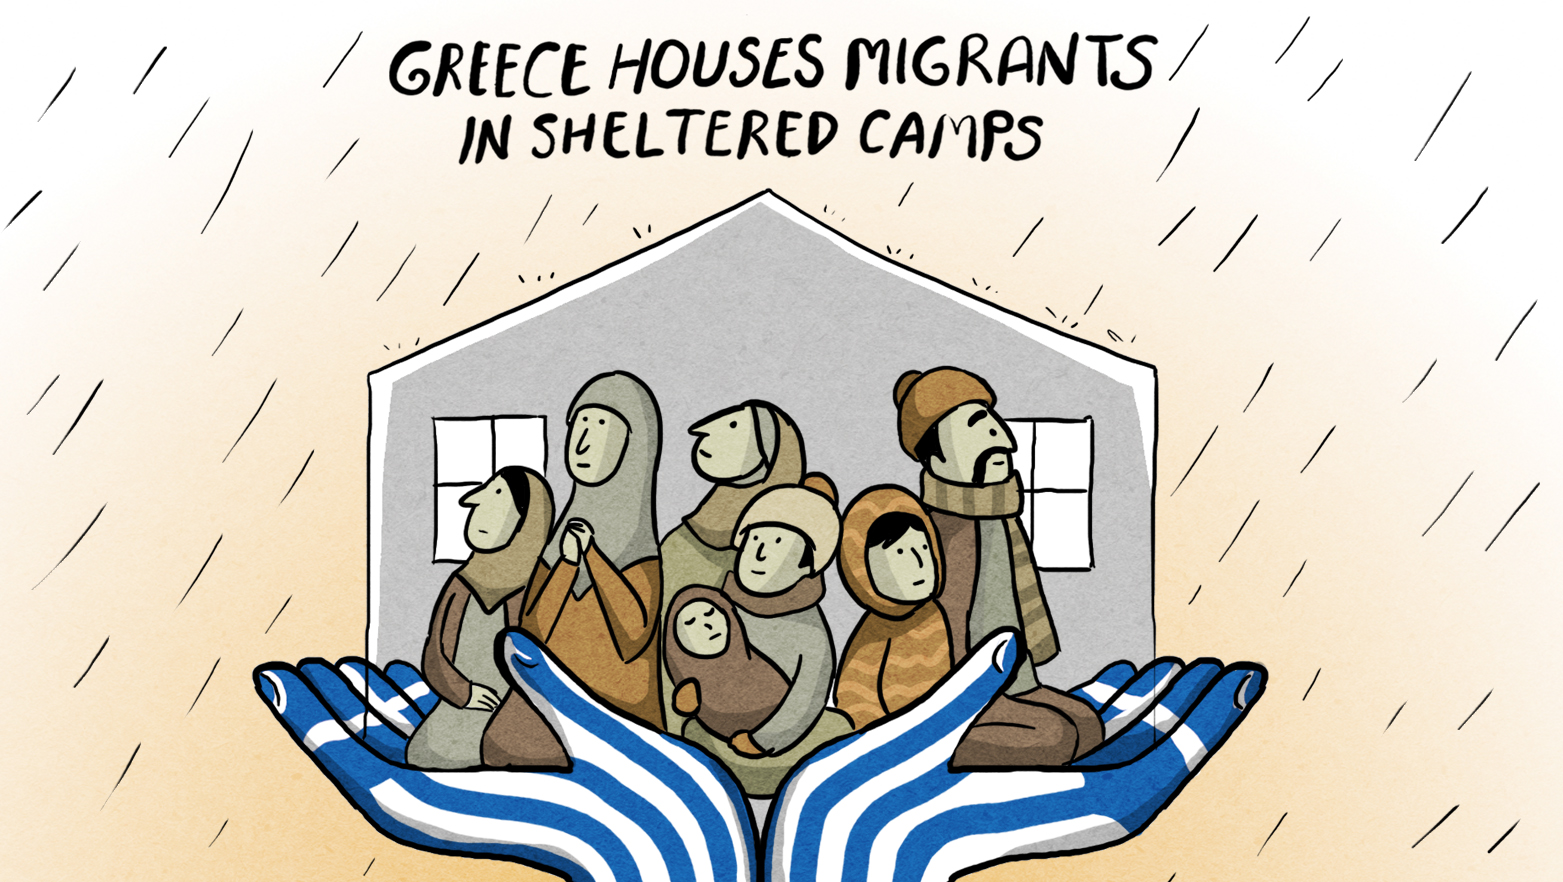 Greece houses migrants in sheltered camps